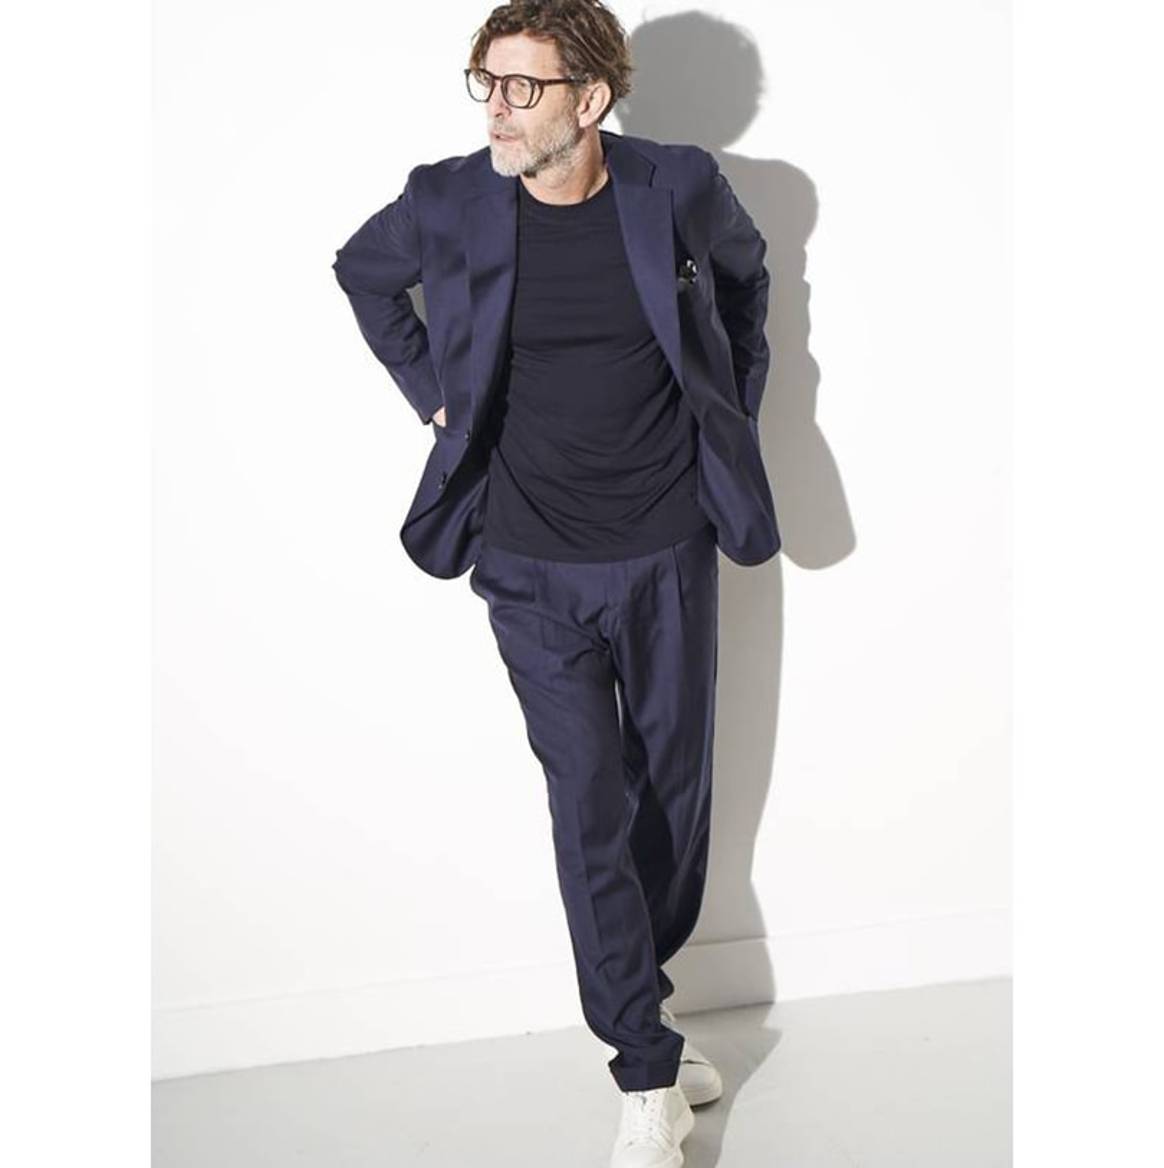 Menswear label Neem London launches with focus on low carbon practice